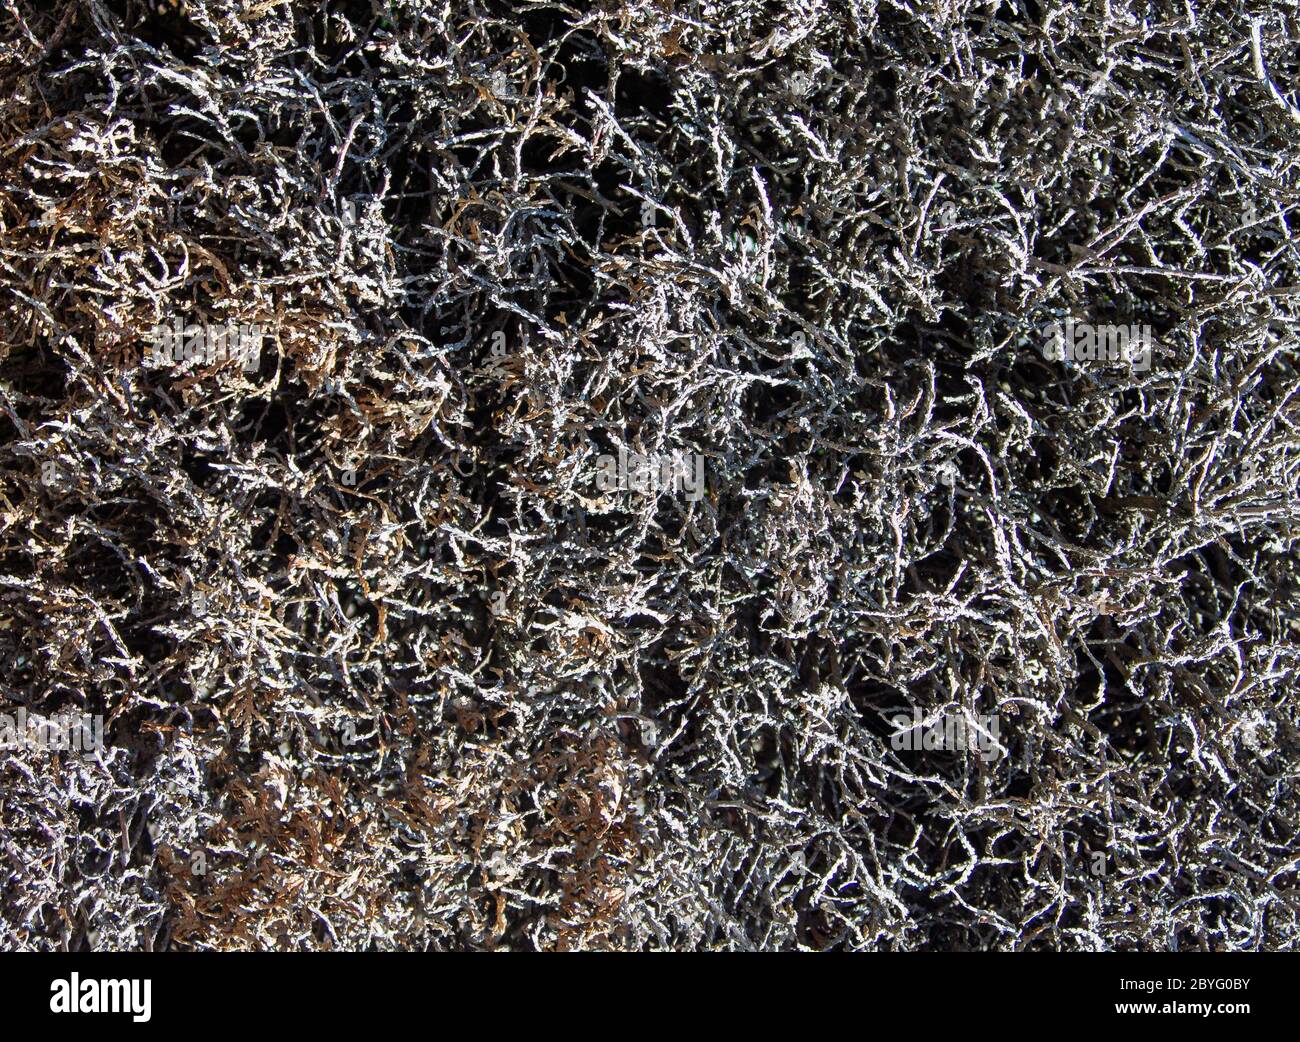 A texture from a withered Hedge. Stock Photo